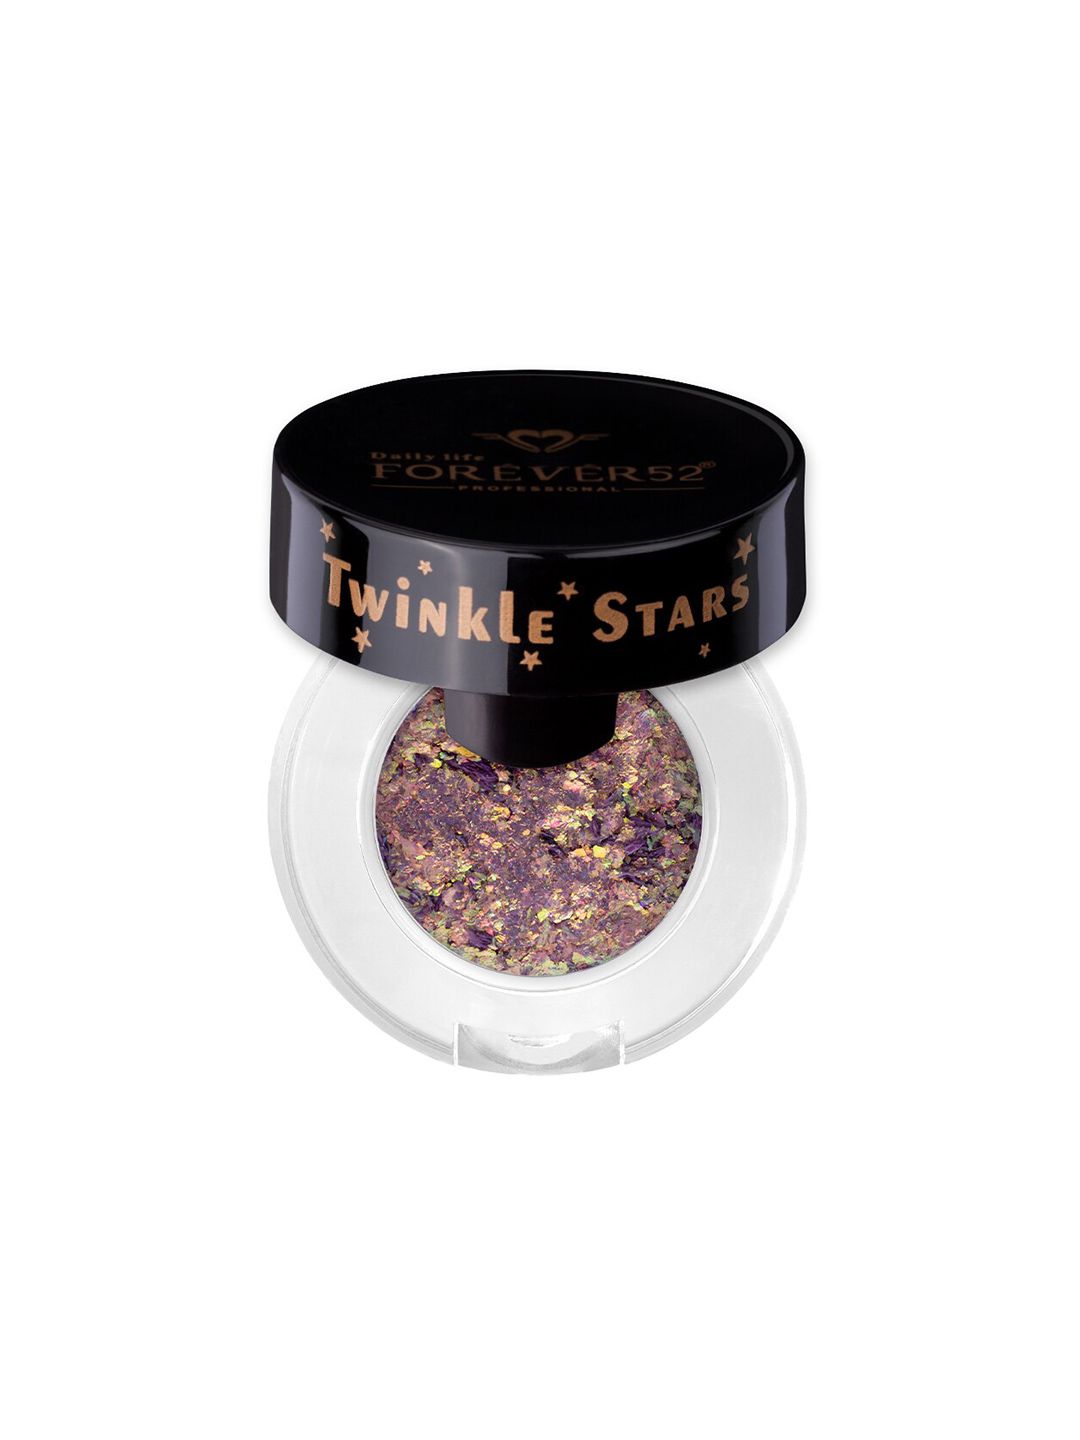 Daily Life Forever52 Twinkle Star Flakes Eyeshadow - TF018 Price in India